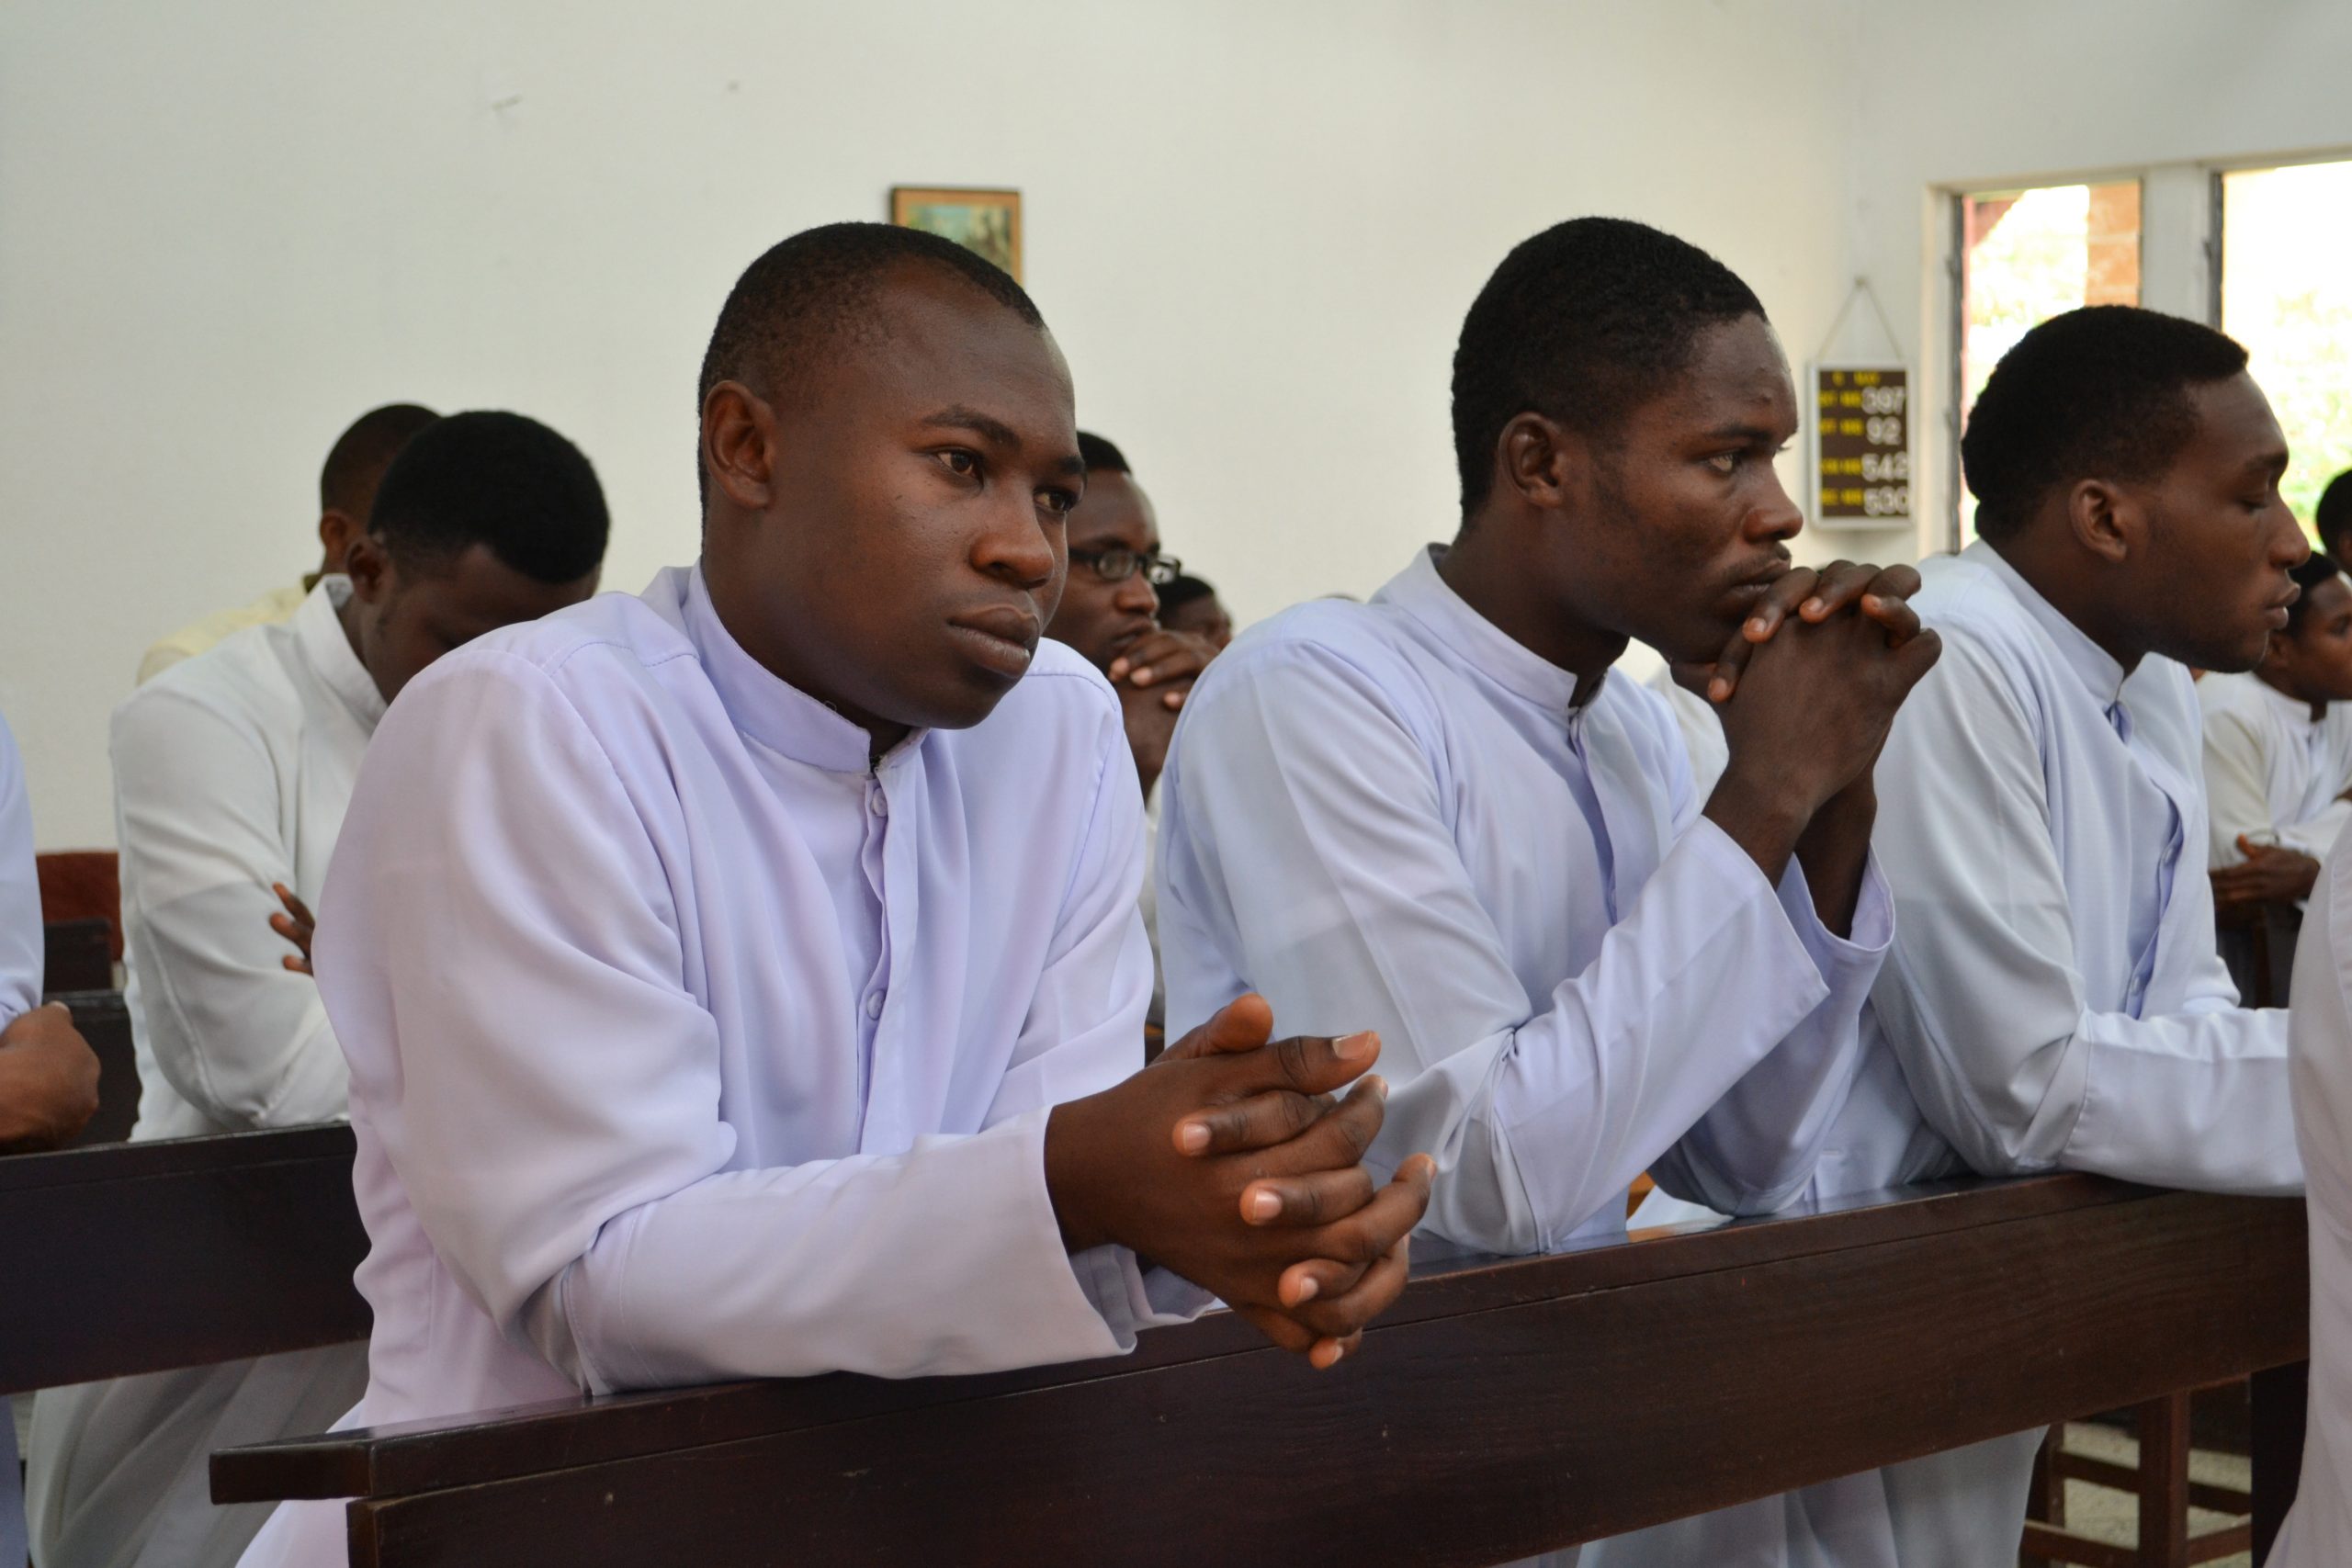 With picture of seminarians at prayer in Nigeria (Image © Aid to the Church in Need)